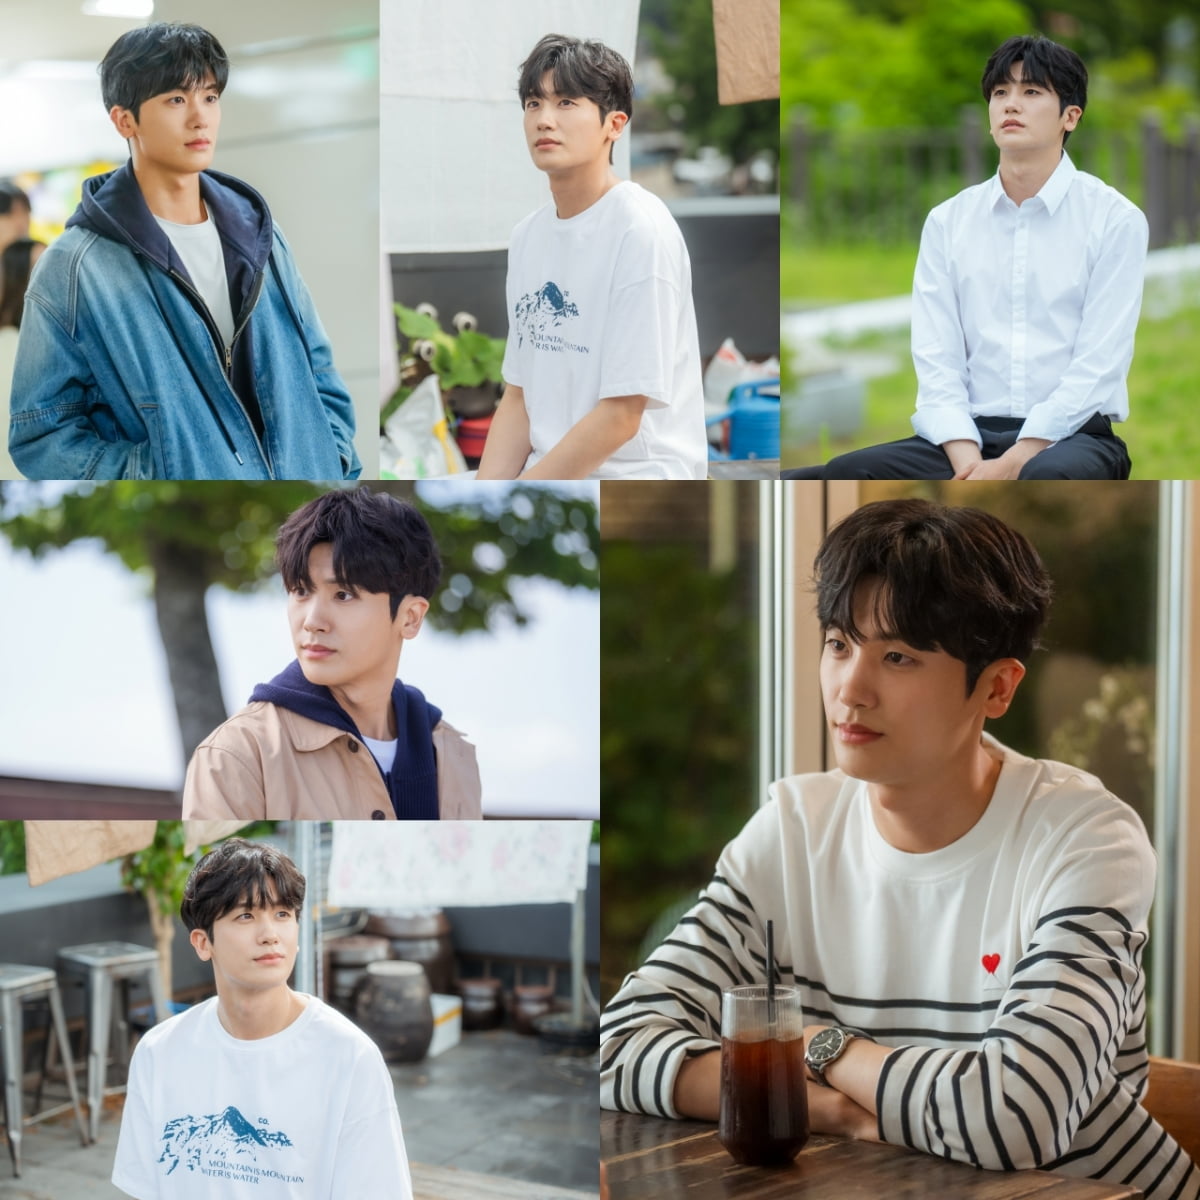 Park Hyung-sik, hope and comfort that caused over-immersion